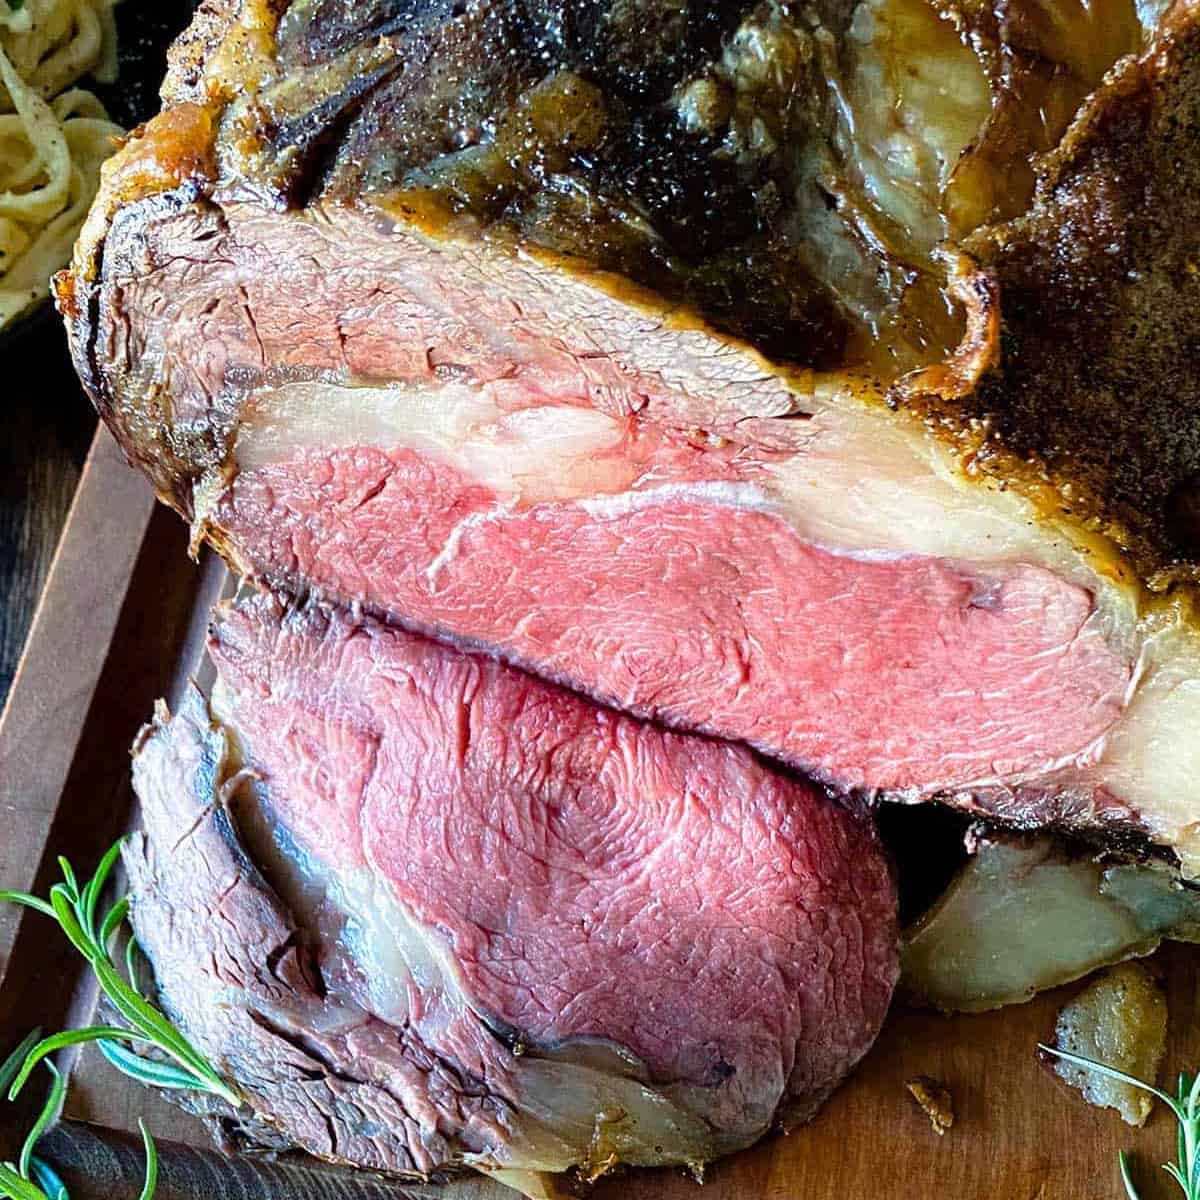 https://bestbeefrecipes.com/wp-content/uploads/2022/03/slow-cooked-prime-rib-featured.jpg